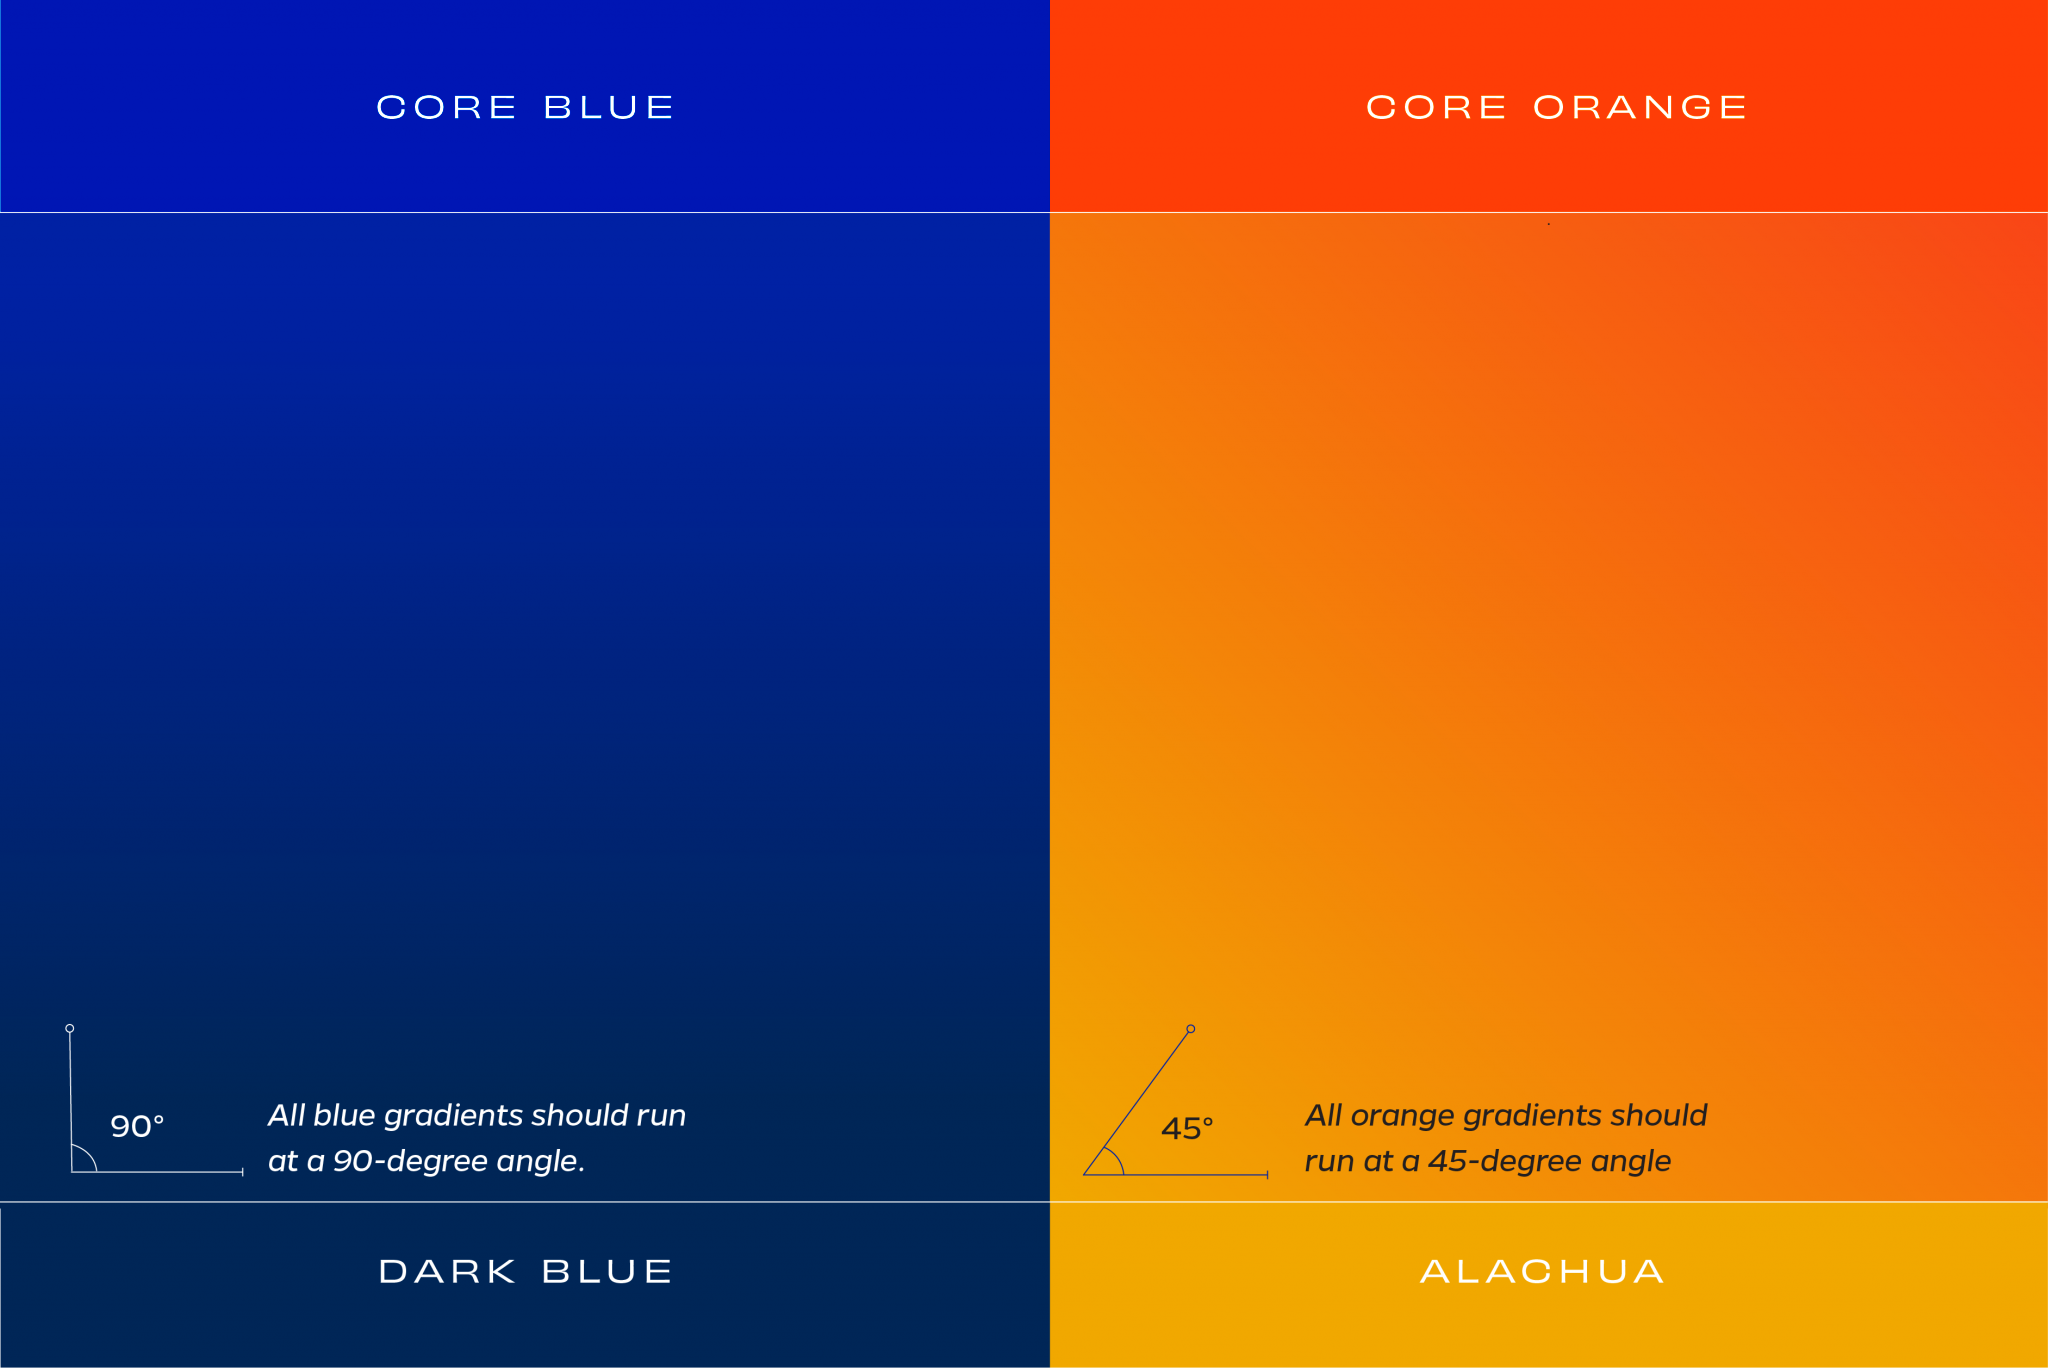 Gradient blue is built at a 90-degree angle running from core blue at the top to dark blue at the bottom. Gradient orange is built at a 45-degree angle from core orange at the top right corner to Alachua (yellow) at the bottom left corner.